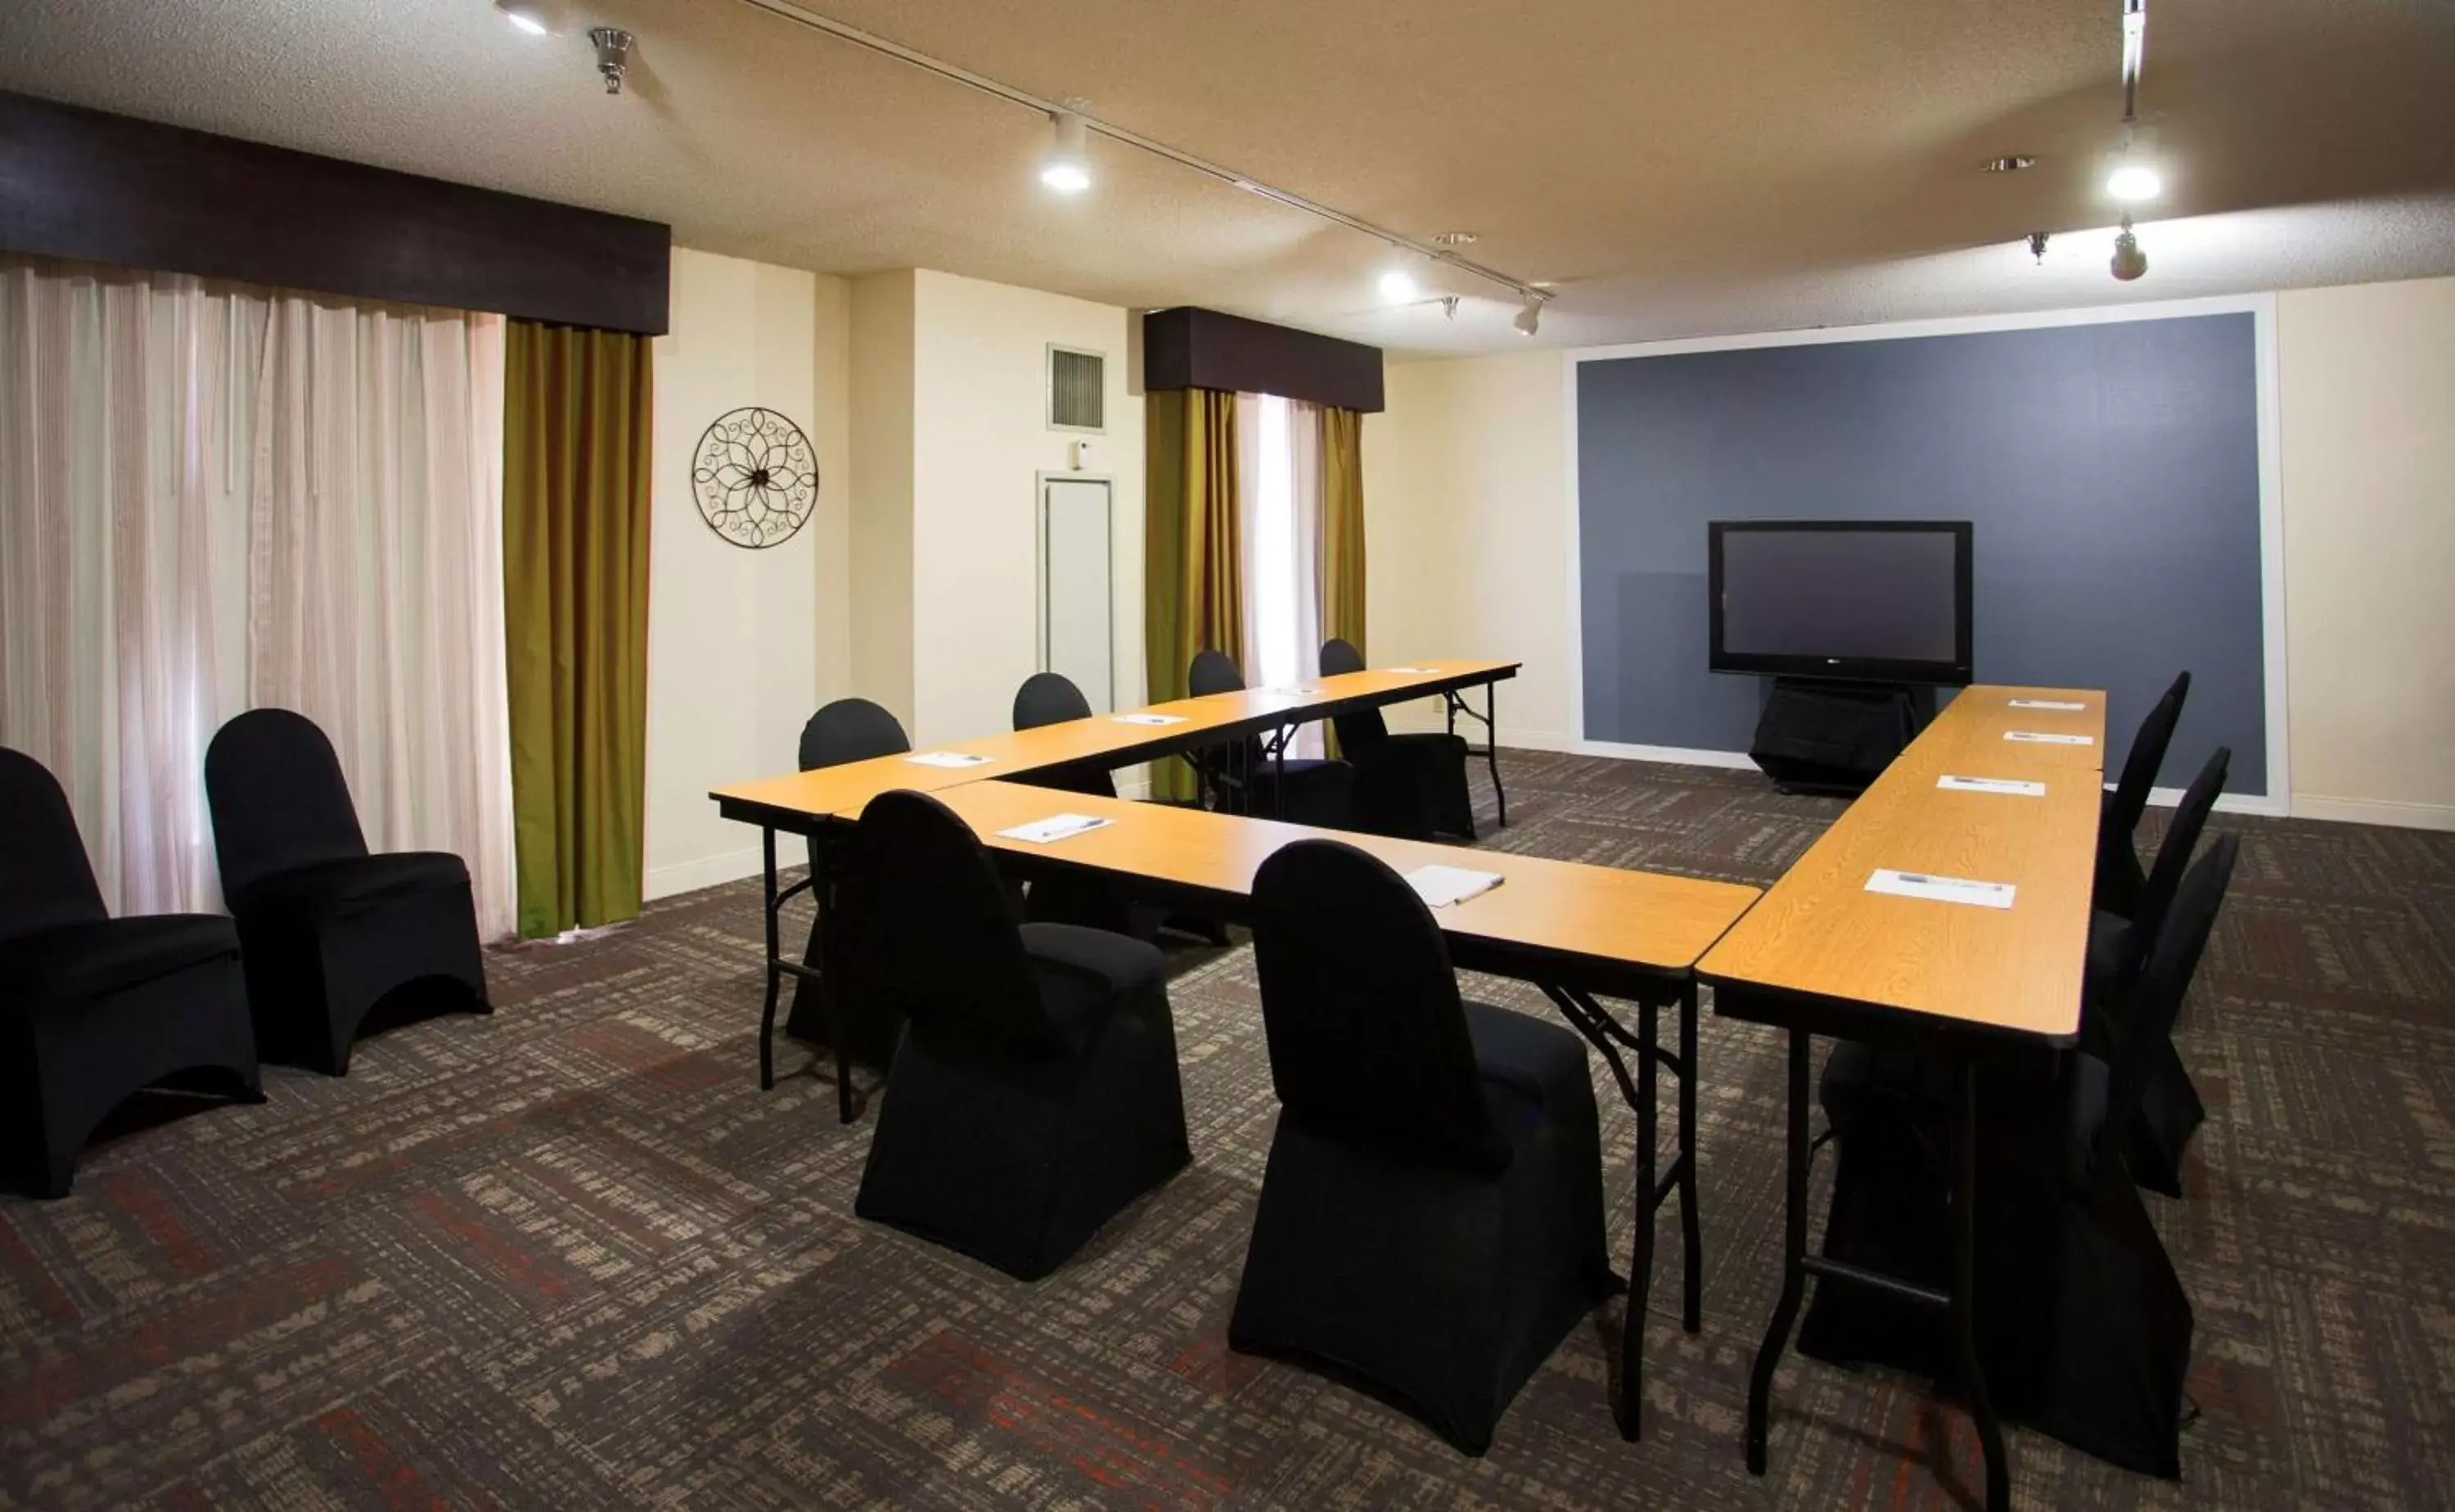 Meeting/conference room in Hampton Inn & Suites Valdosta/Conference Center